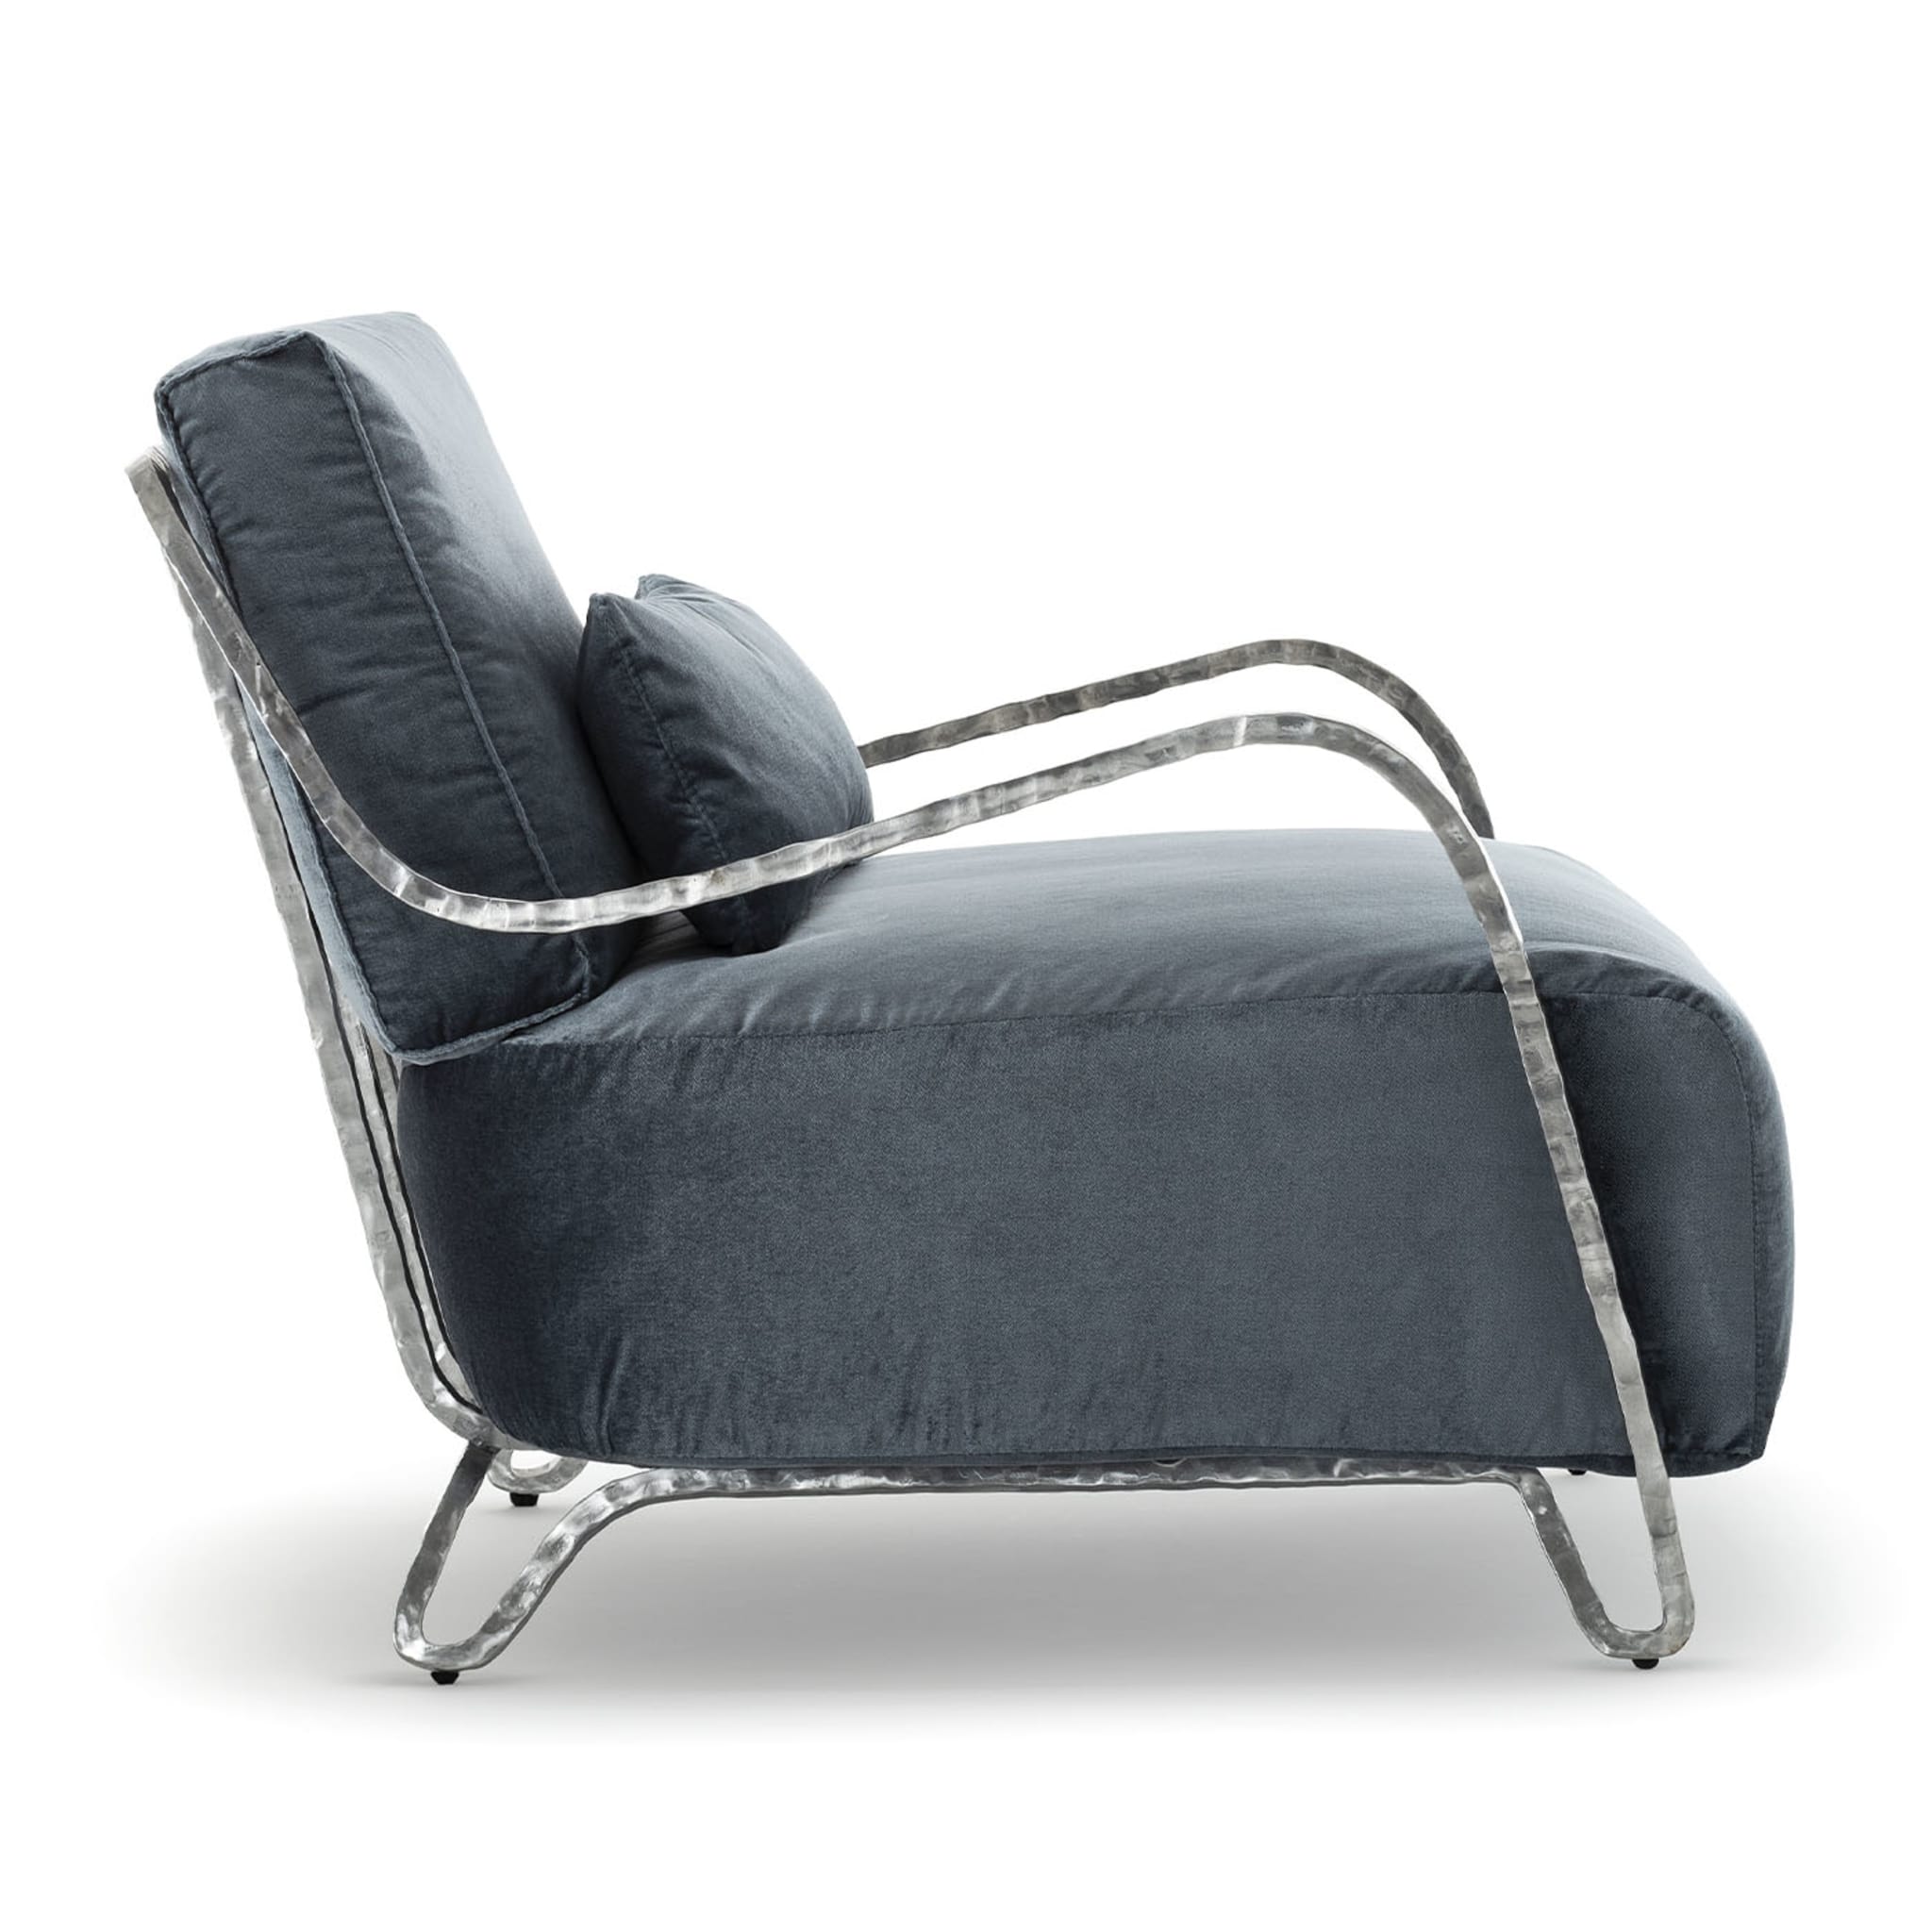 Moonlight Blue and Silver Low Armchair - Alternative view 5